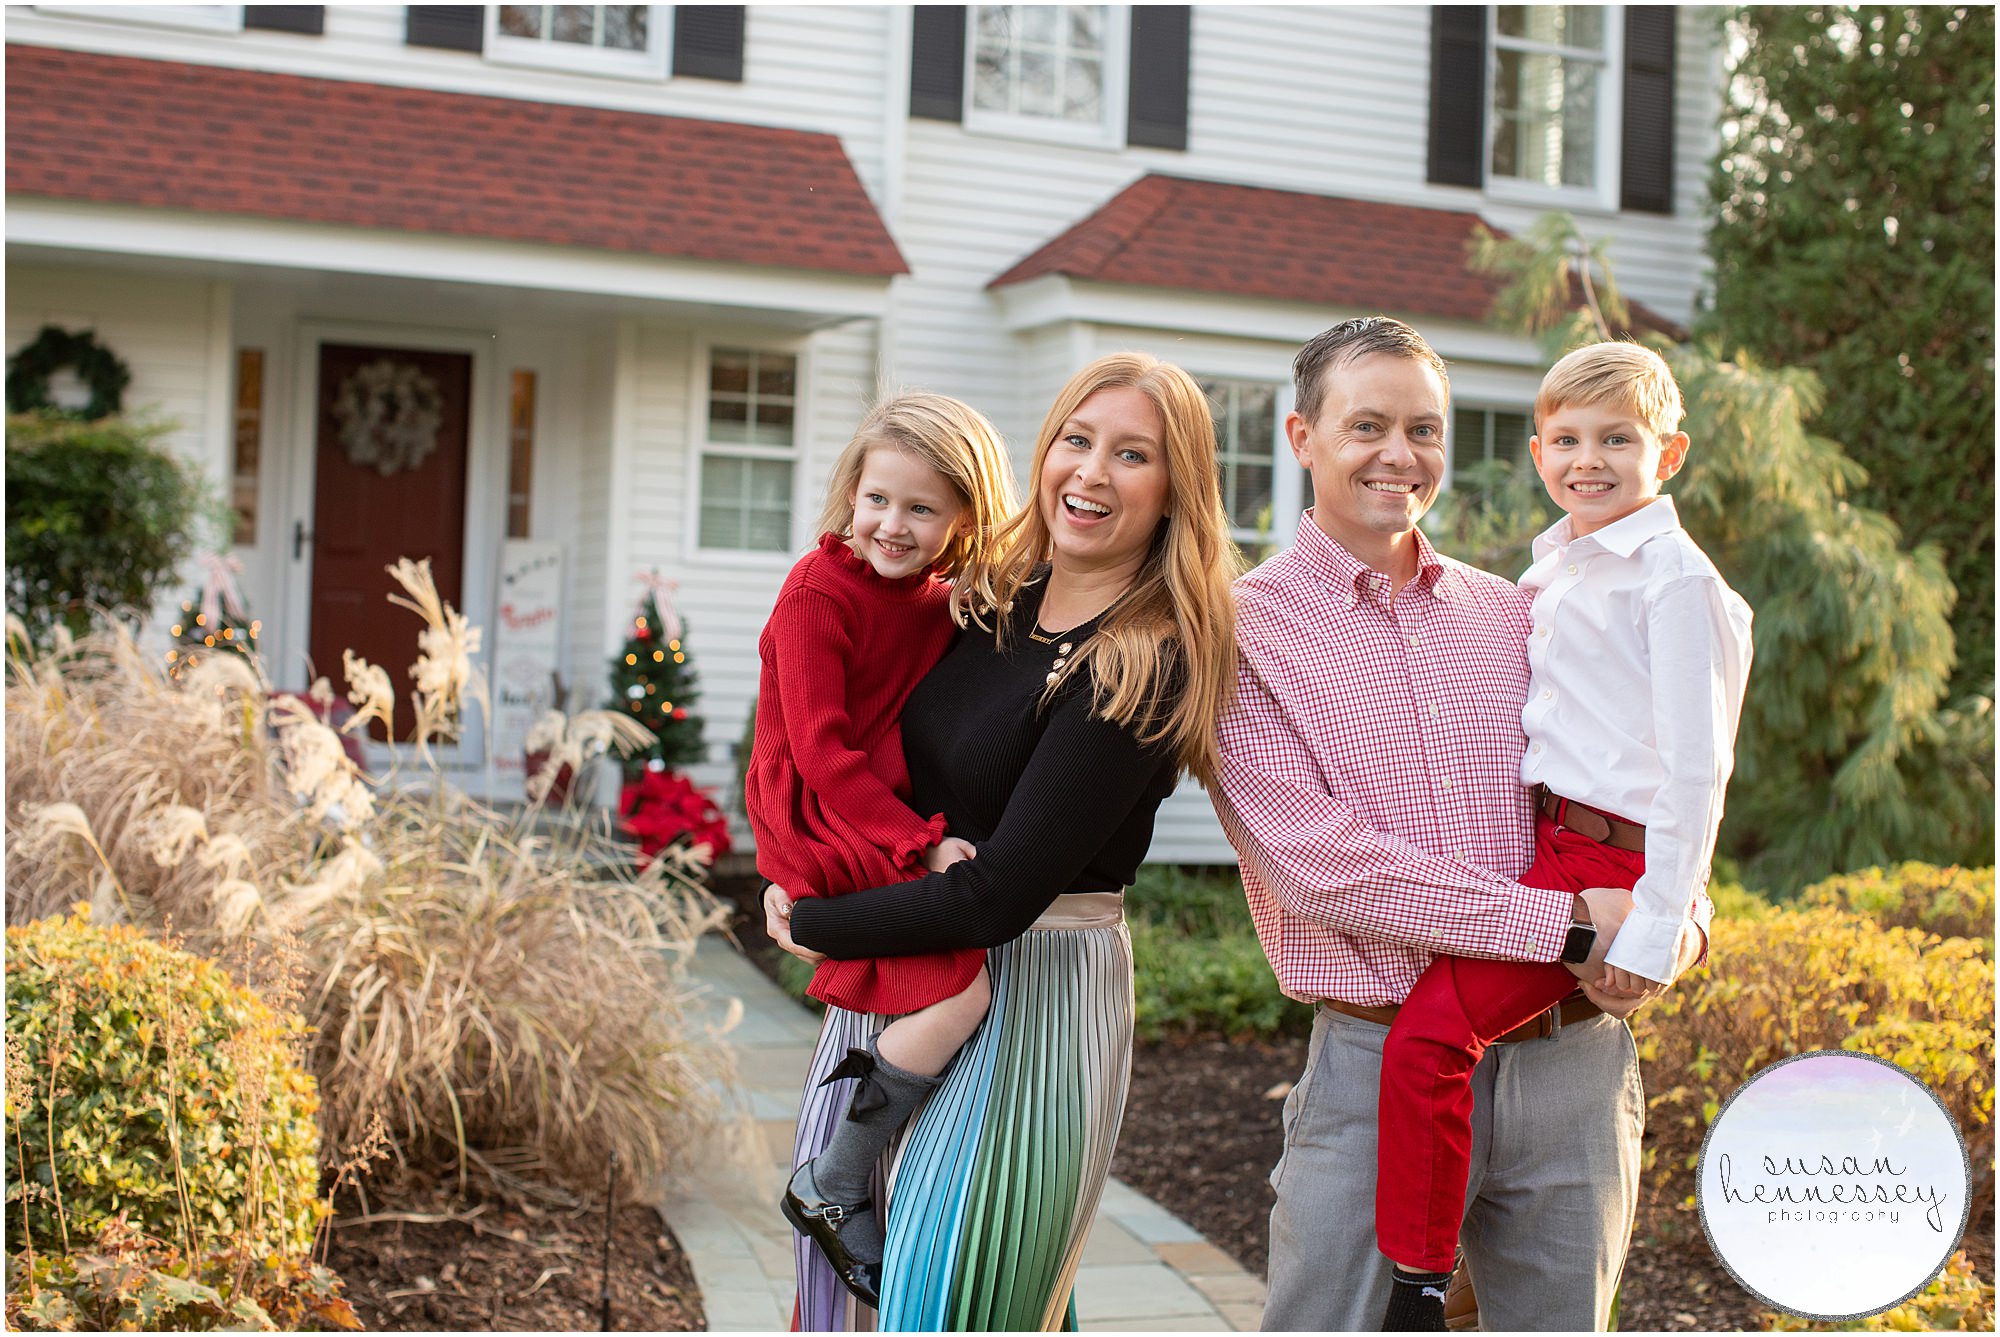 Your house is the perfect backdrop for your South Jersey holiday family photo session